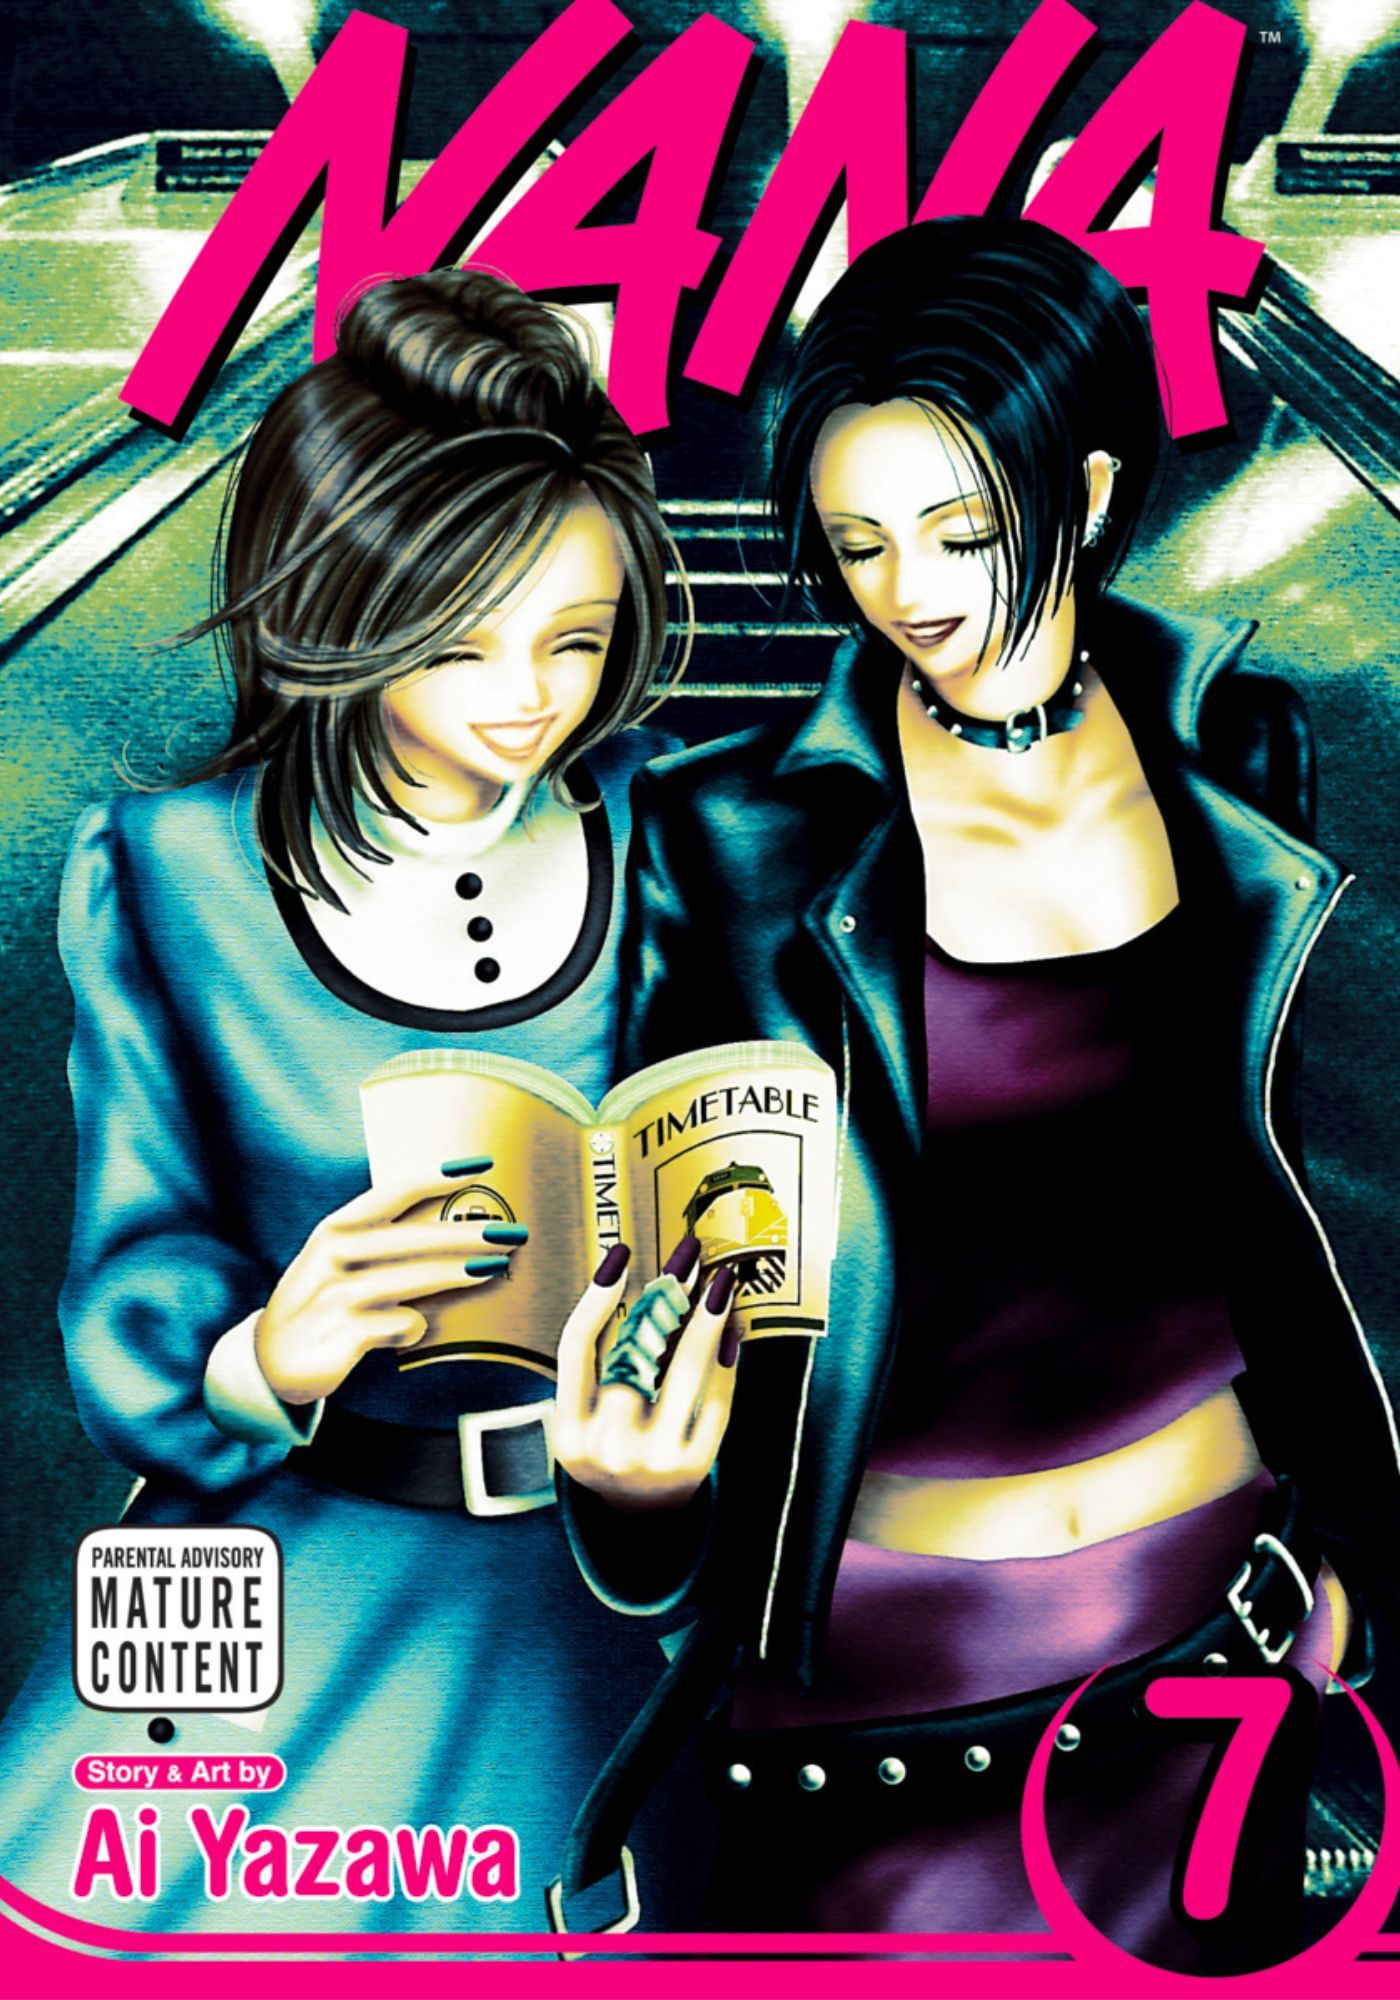 NANA Volume 7 cover art depicting Nana and Hachi checking the train's schedule together while going down an escalator.